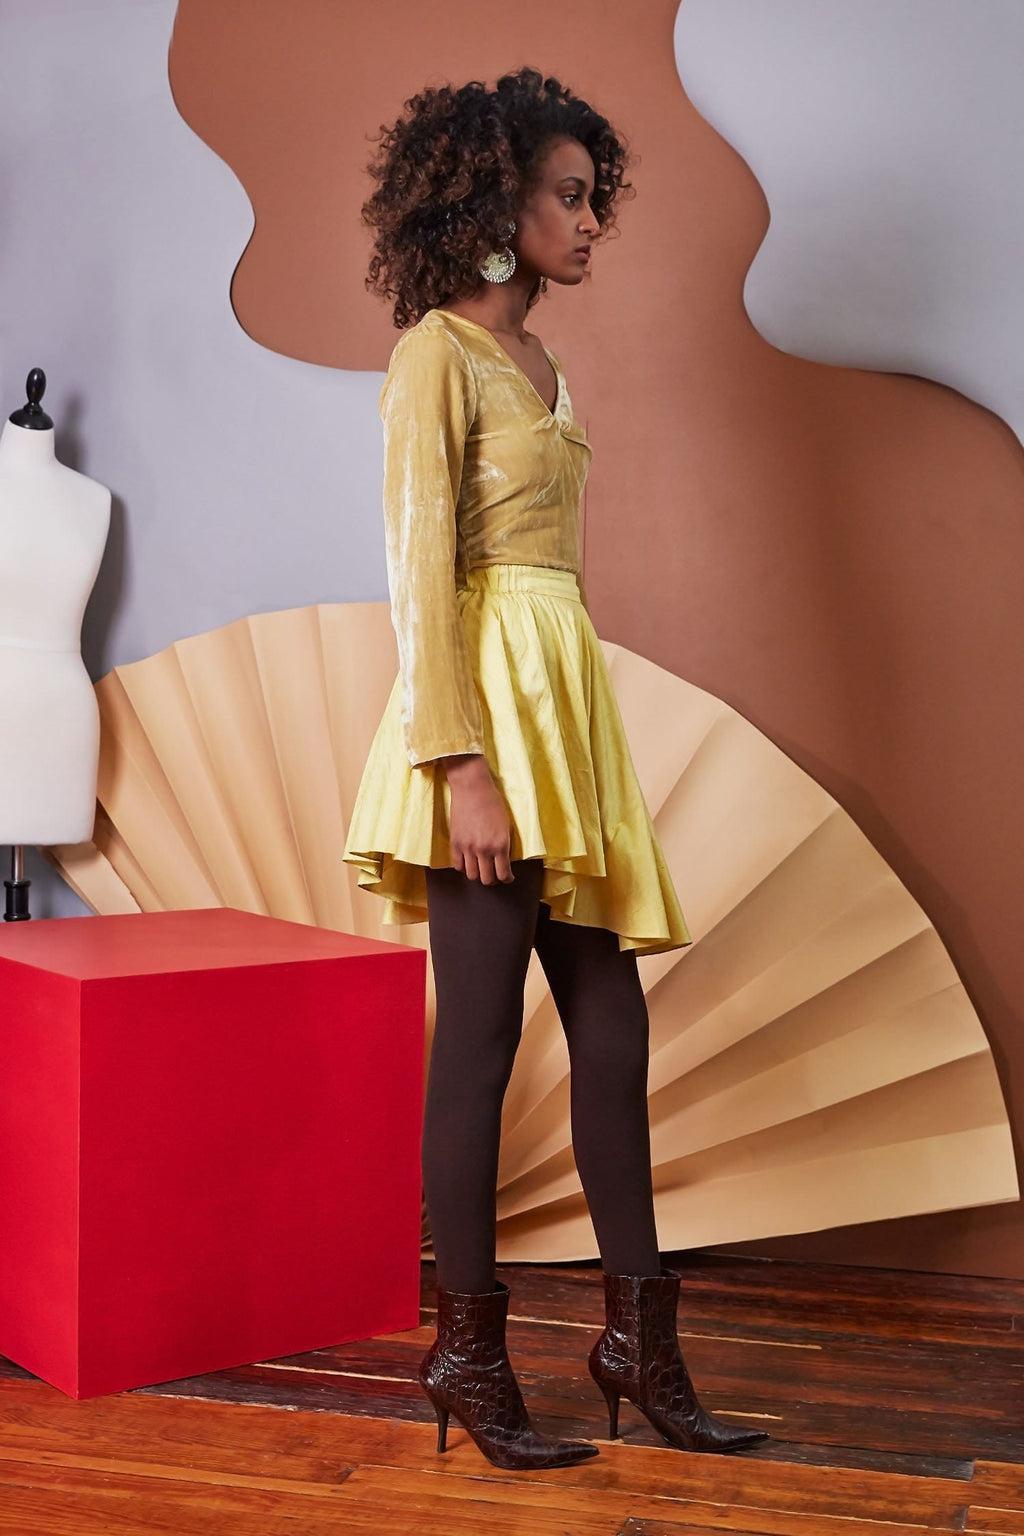 Lavanya Coodly Apparel & Accessories > Clothing > Skirts XS / Daffodil Lavanya Coodly Women's Evie Silk Mini Skirt with Asymmetric Hemline in Daffodil Hue